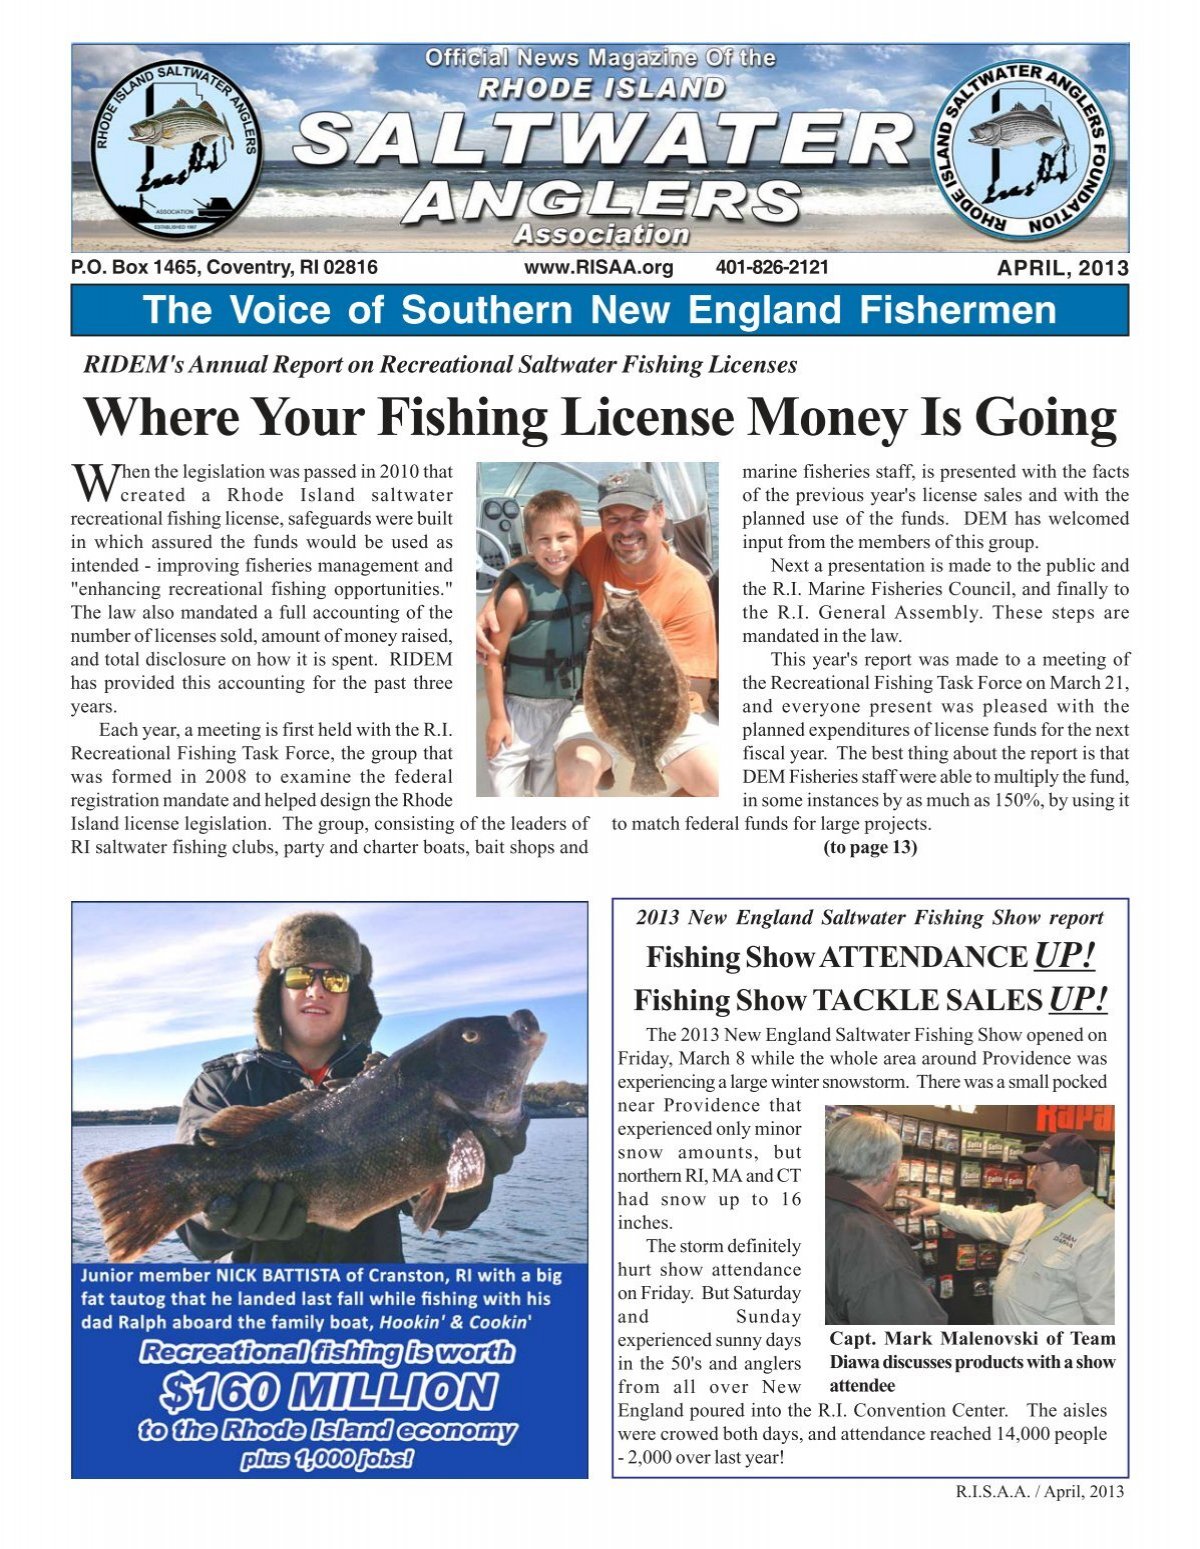 Where Your Fishing License Money Is Going - The Rhode Island